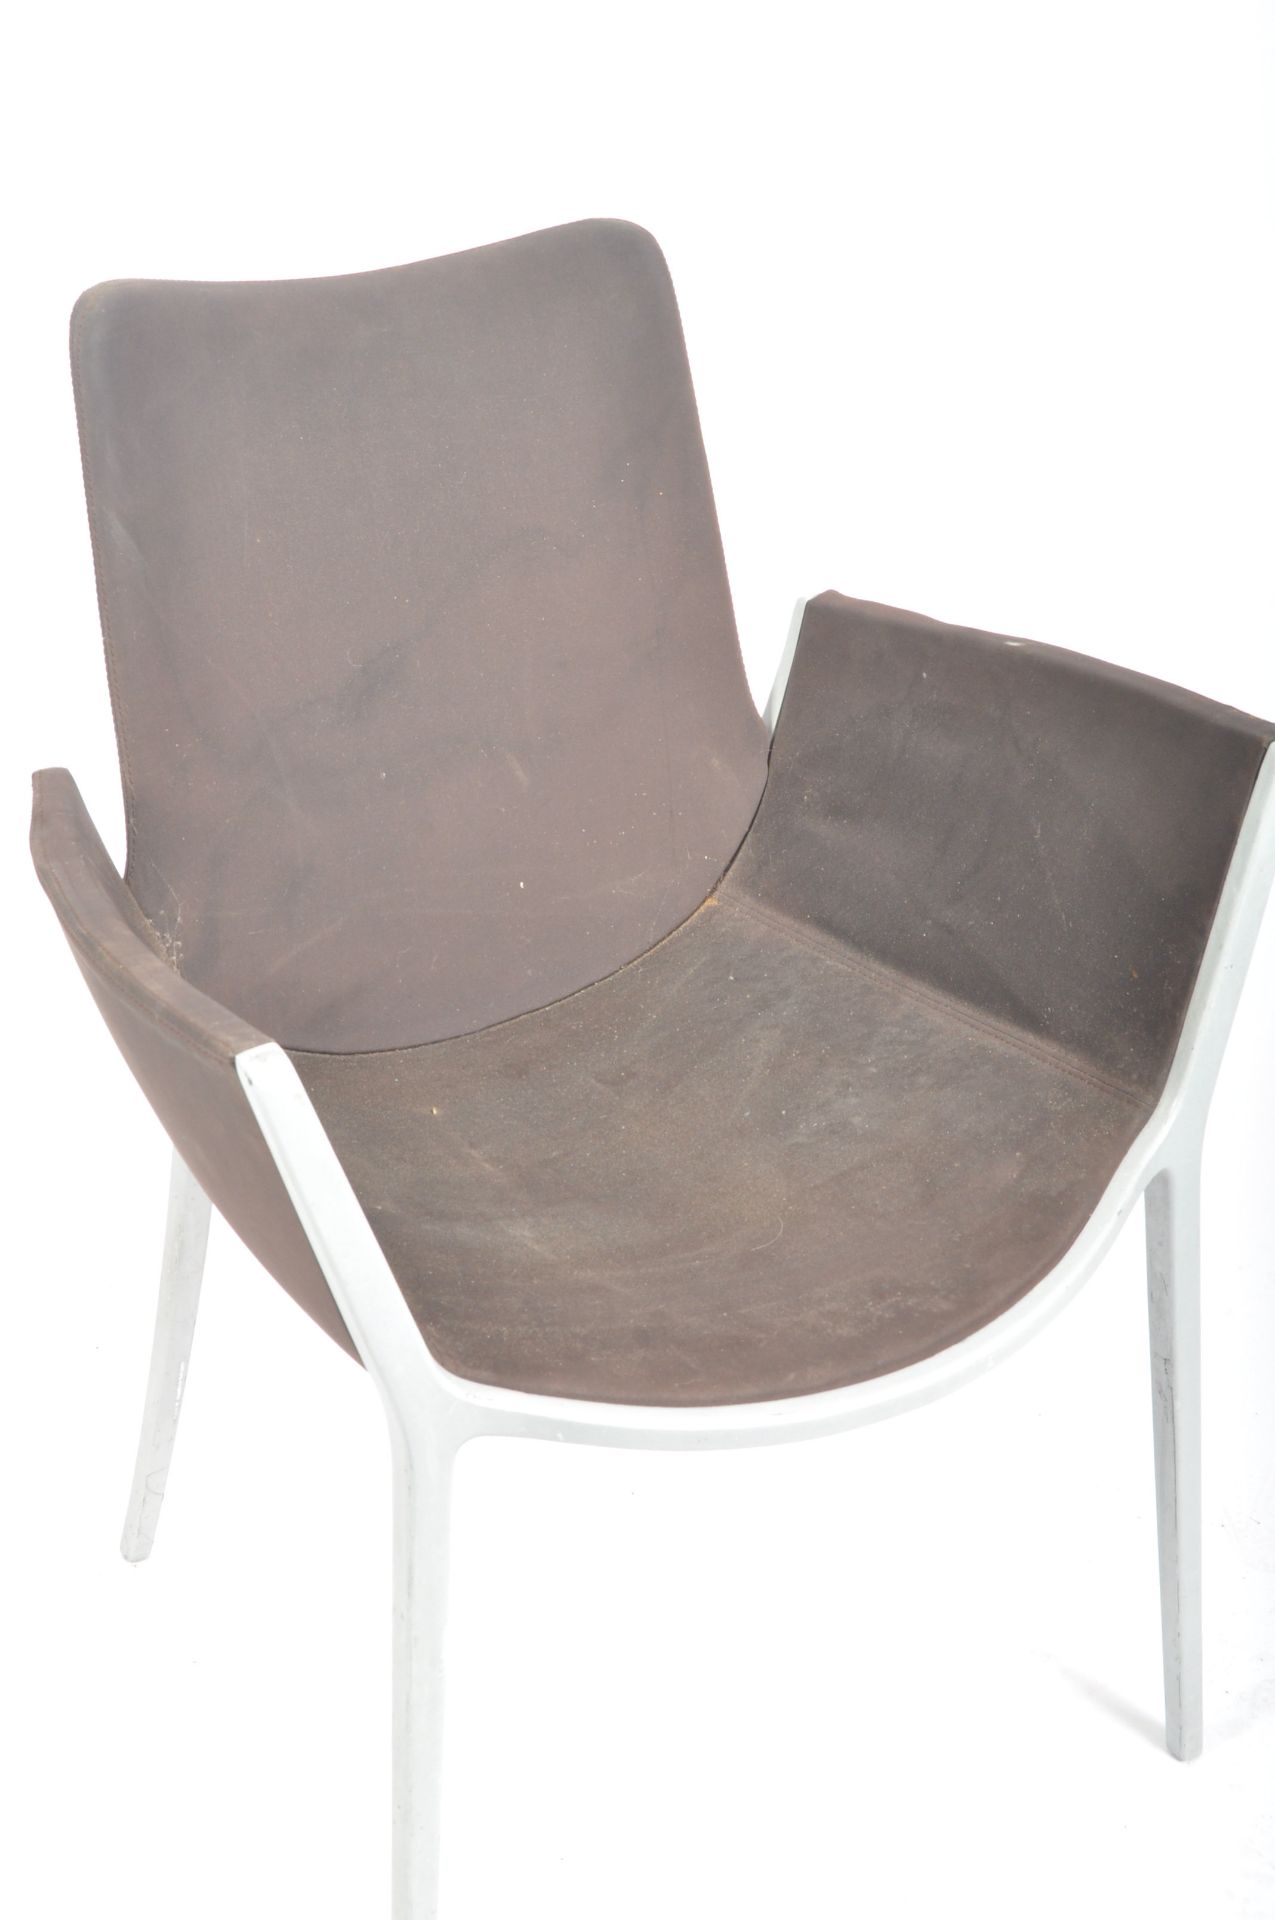 JORGE PENSI FOR CASSINA - MATCHING SET OF DJUNA CHAIRS - Image 4 of 4